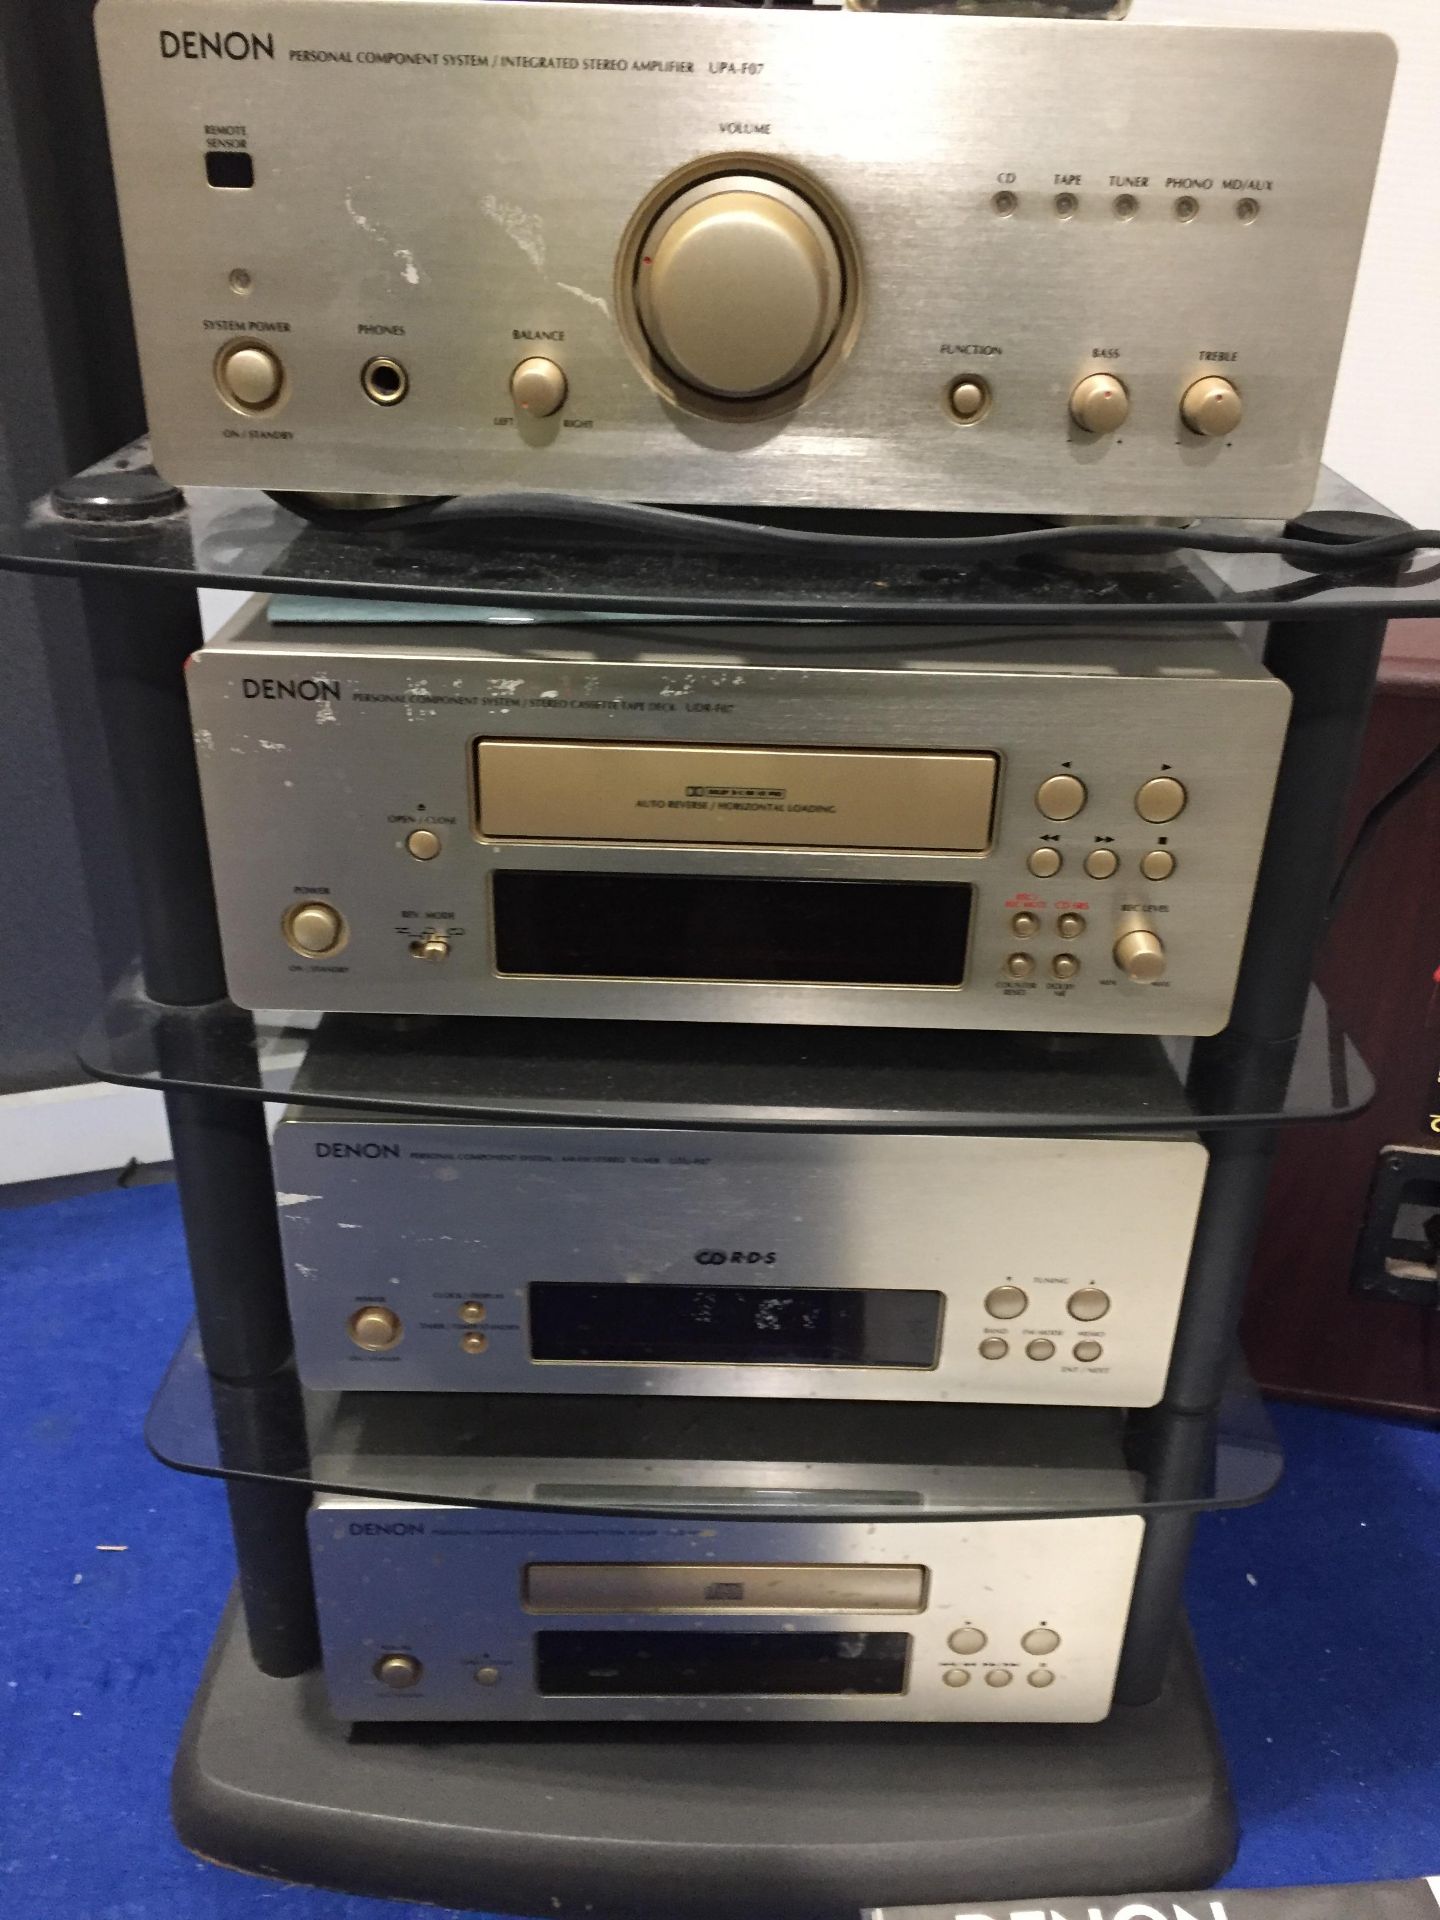 Denon D-F07 Personal Component System: UPA Pre-Main Amplifier, UTU AM FM Stereo Tuner, - Image 2 of 4